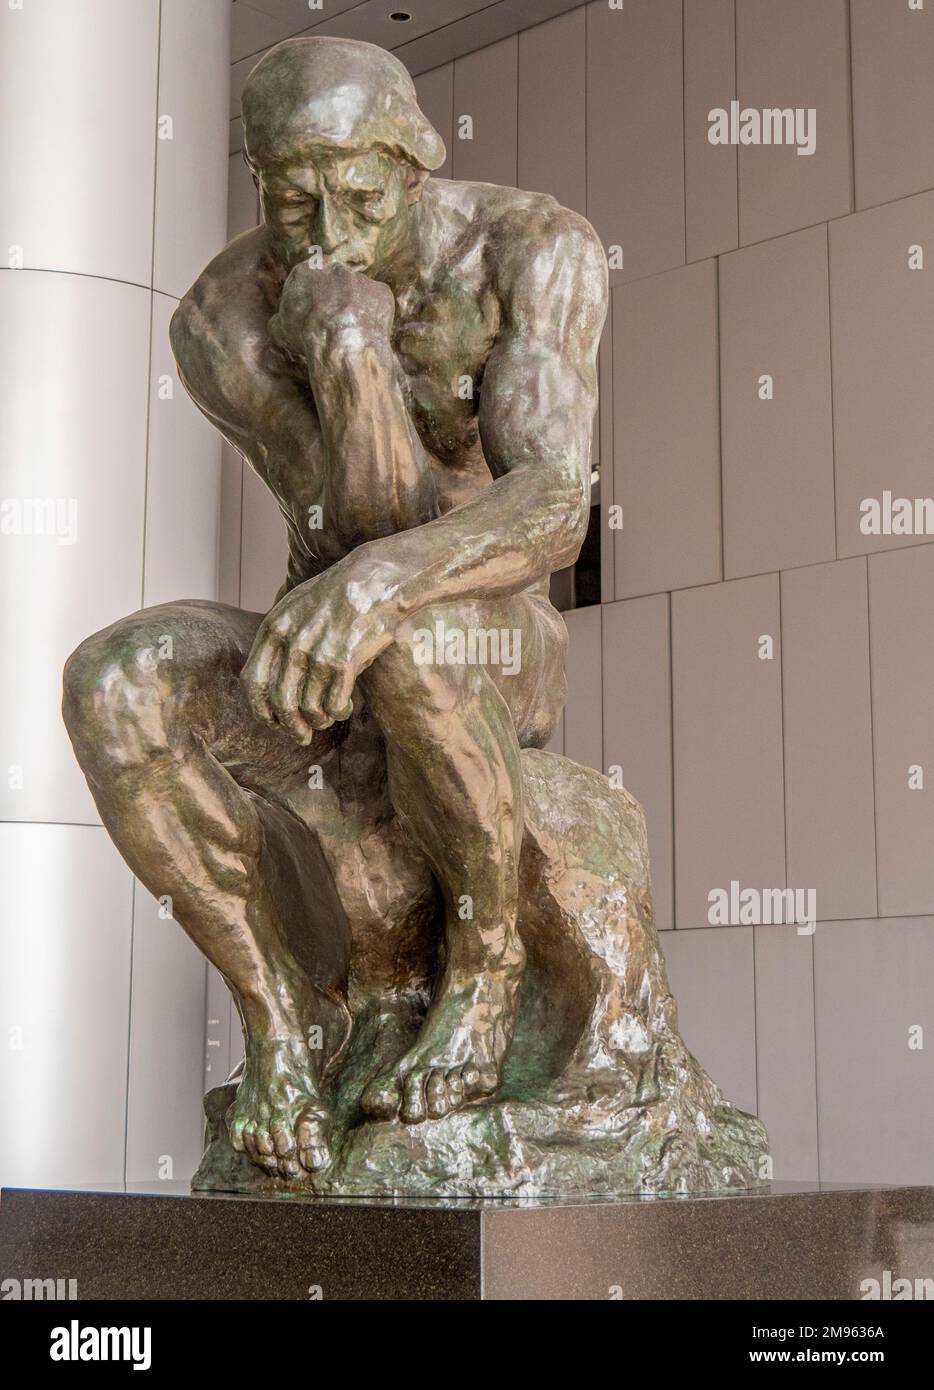 Bronze statue The Thinker by Auguste Rodin on public display in undercroft of OUE Bayfront Building in CBD or Singapore Stock Photo